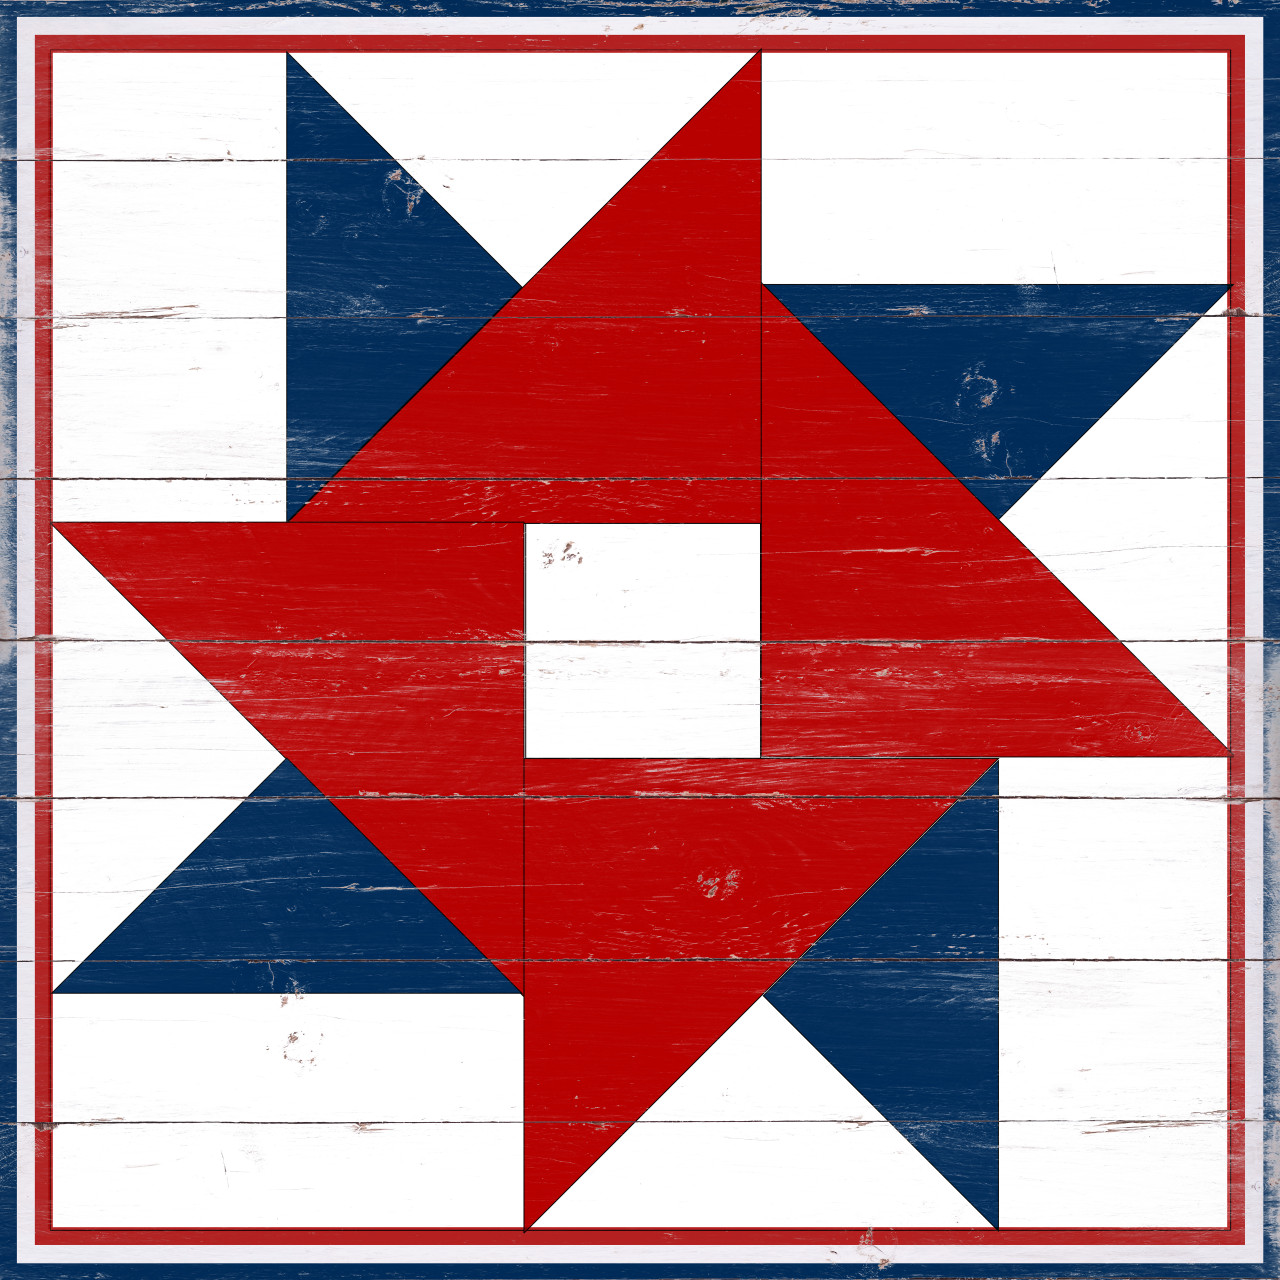 a barn quilt with an American flag pattern